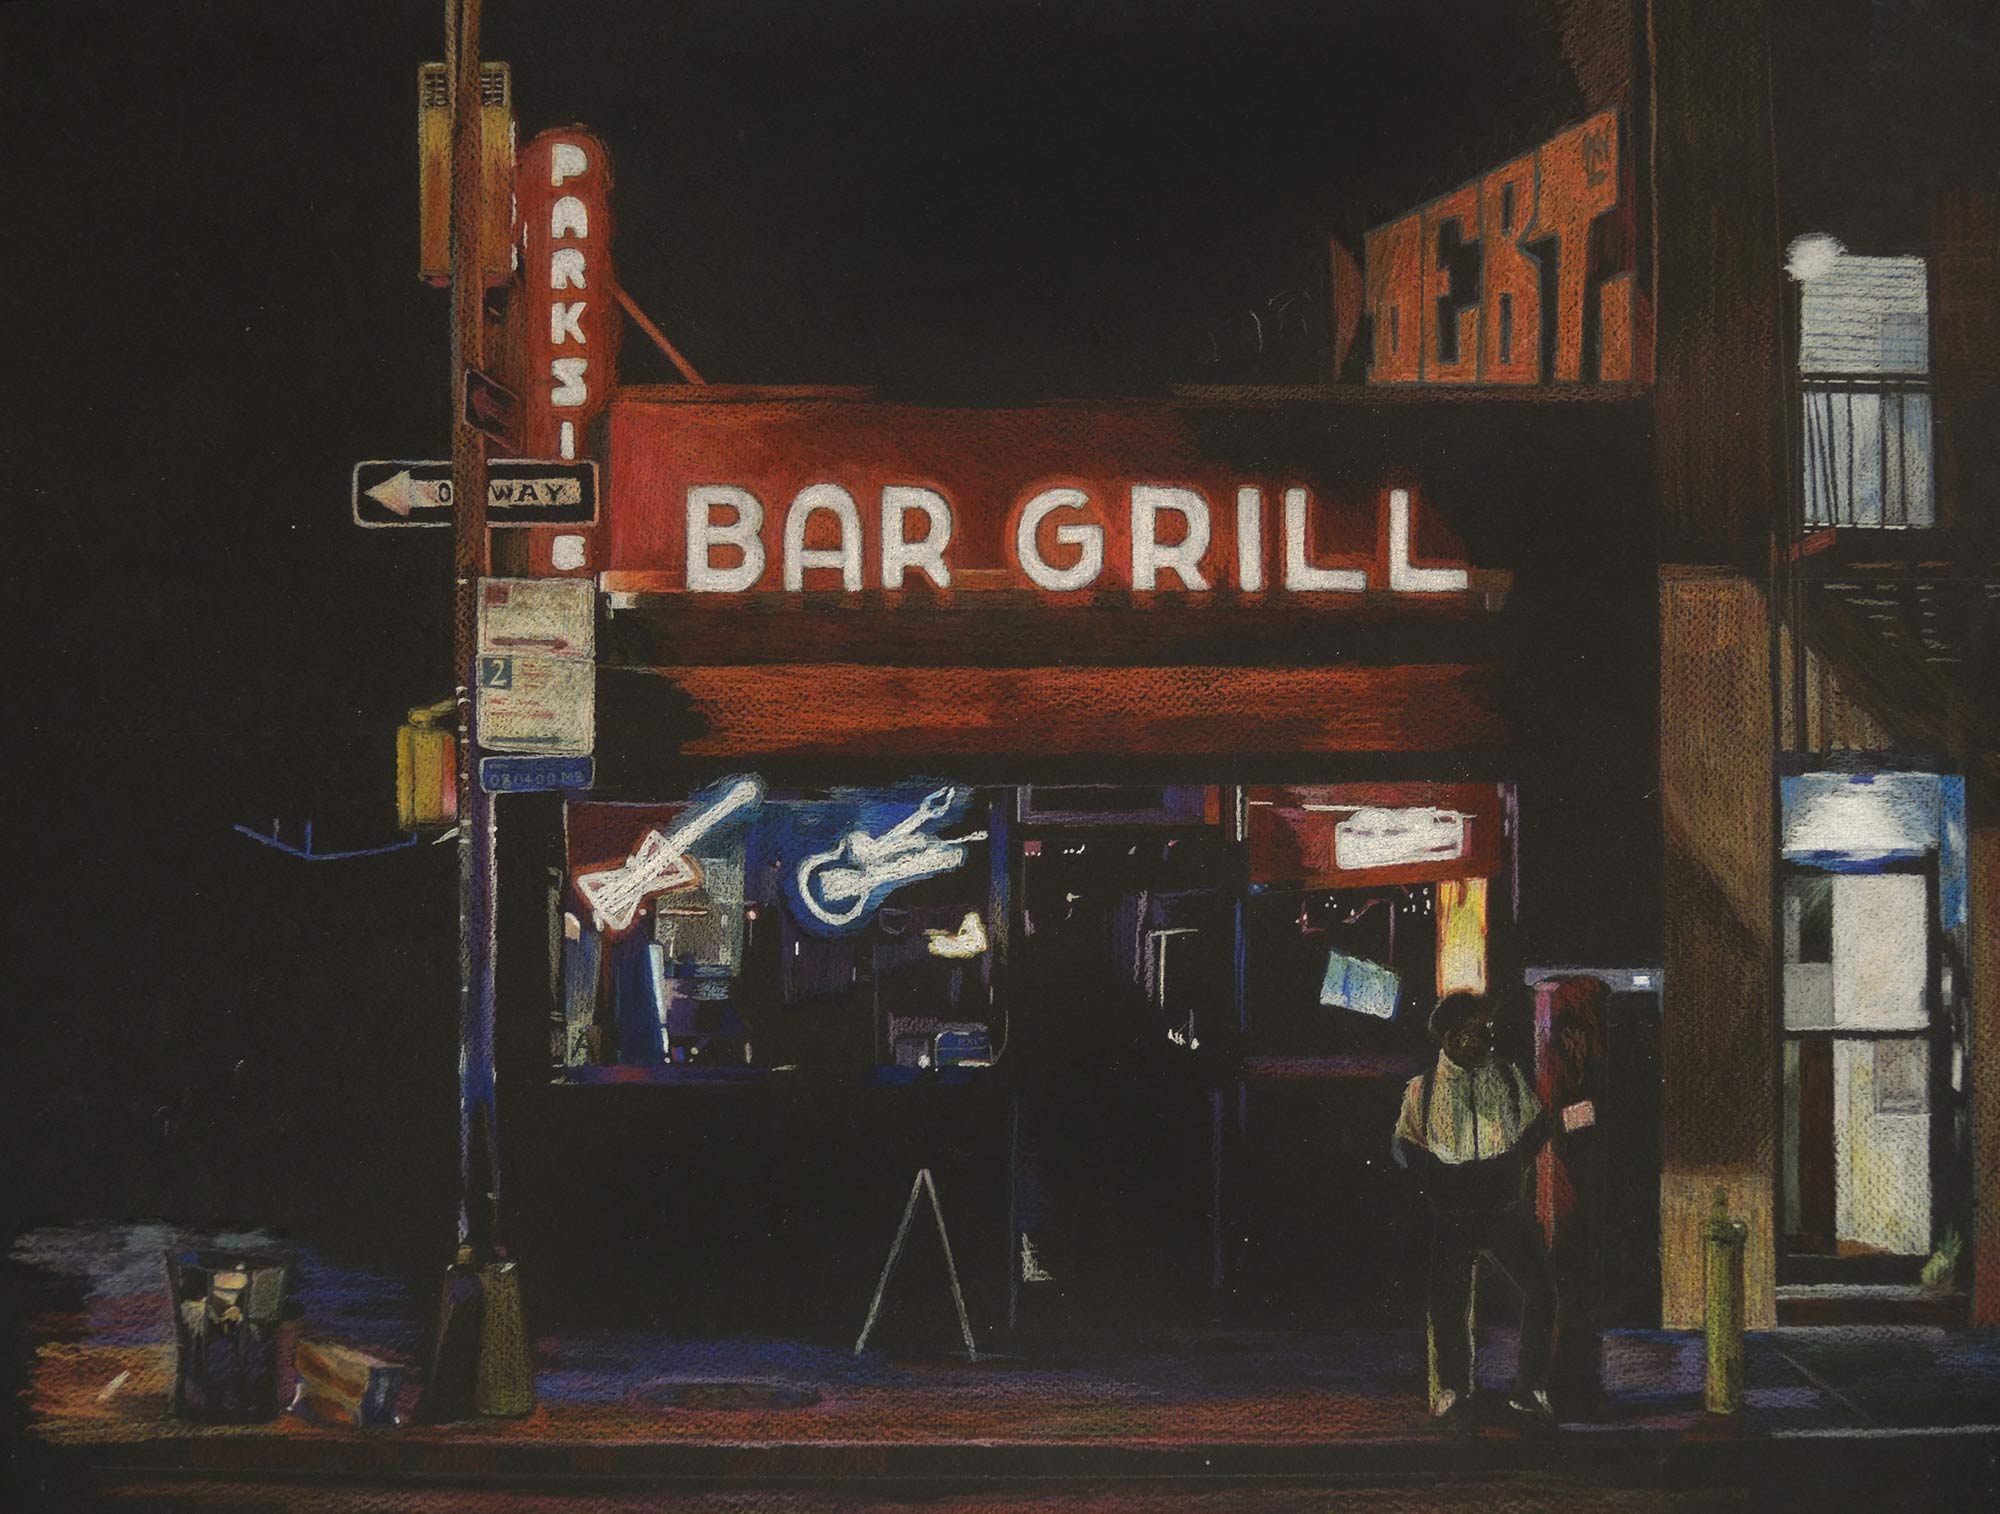 A painting of a bar and grill at night